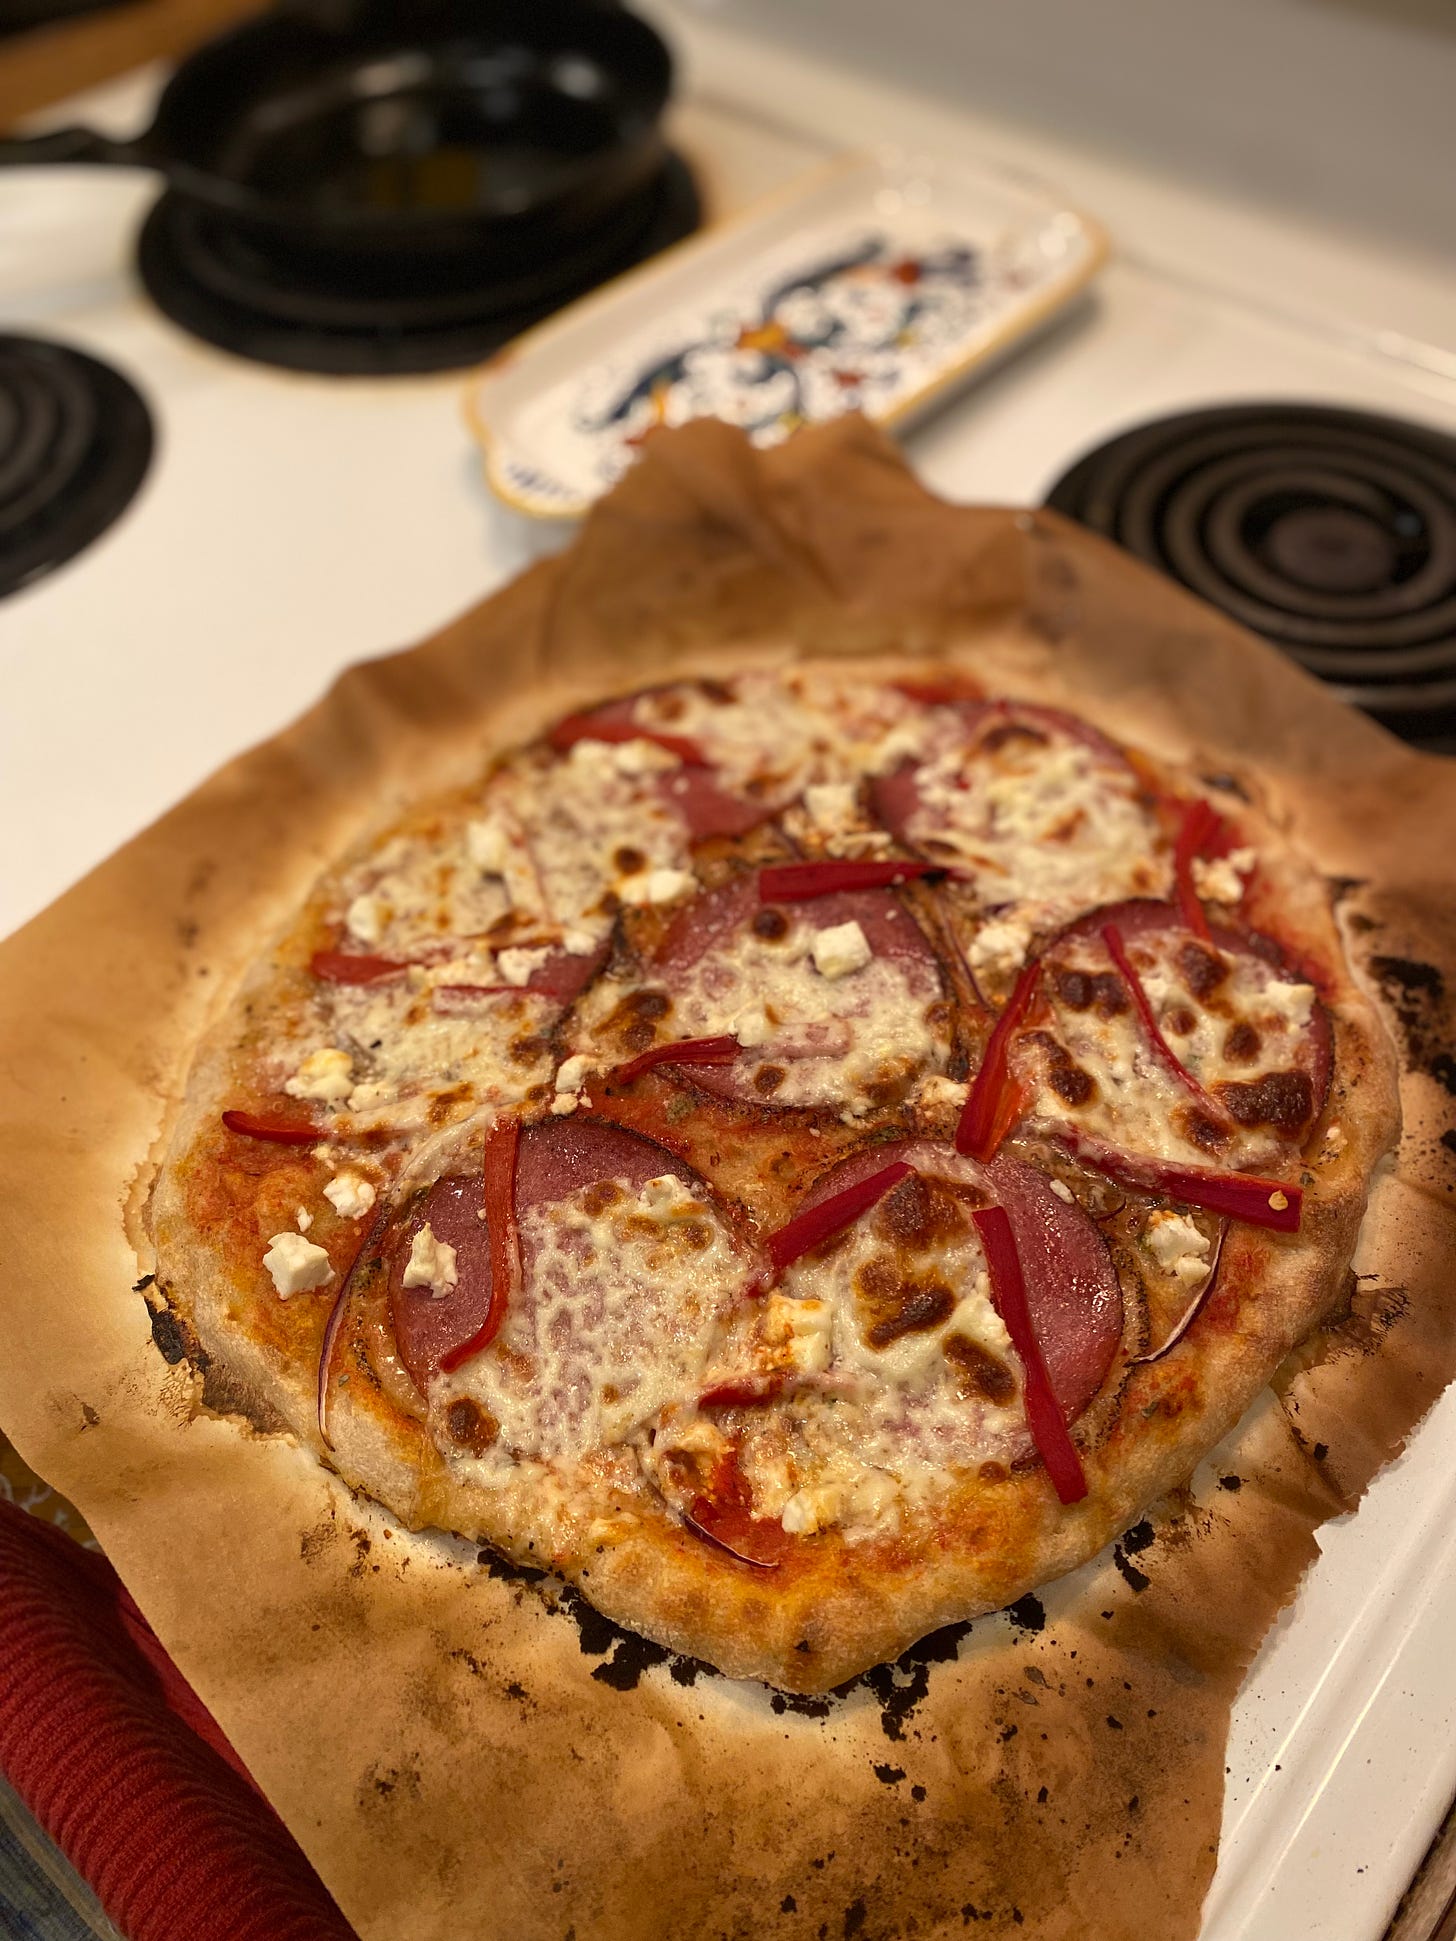 The pizza described above: slices of salami and roasted red pepper and browned cheese over a tomato-sauced crust, set on a piece of parchment burned at the edges from being in the oven. 